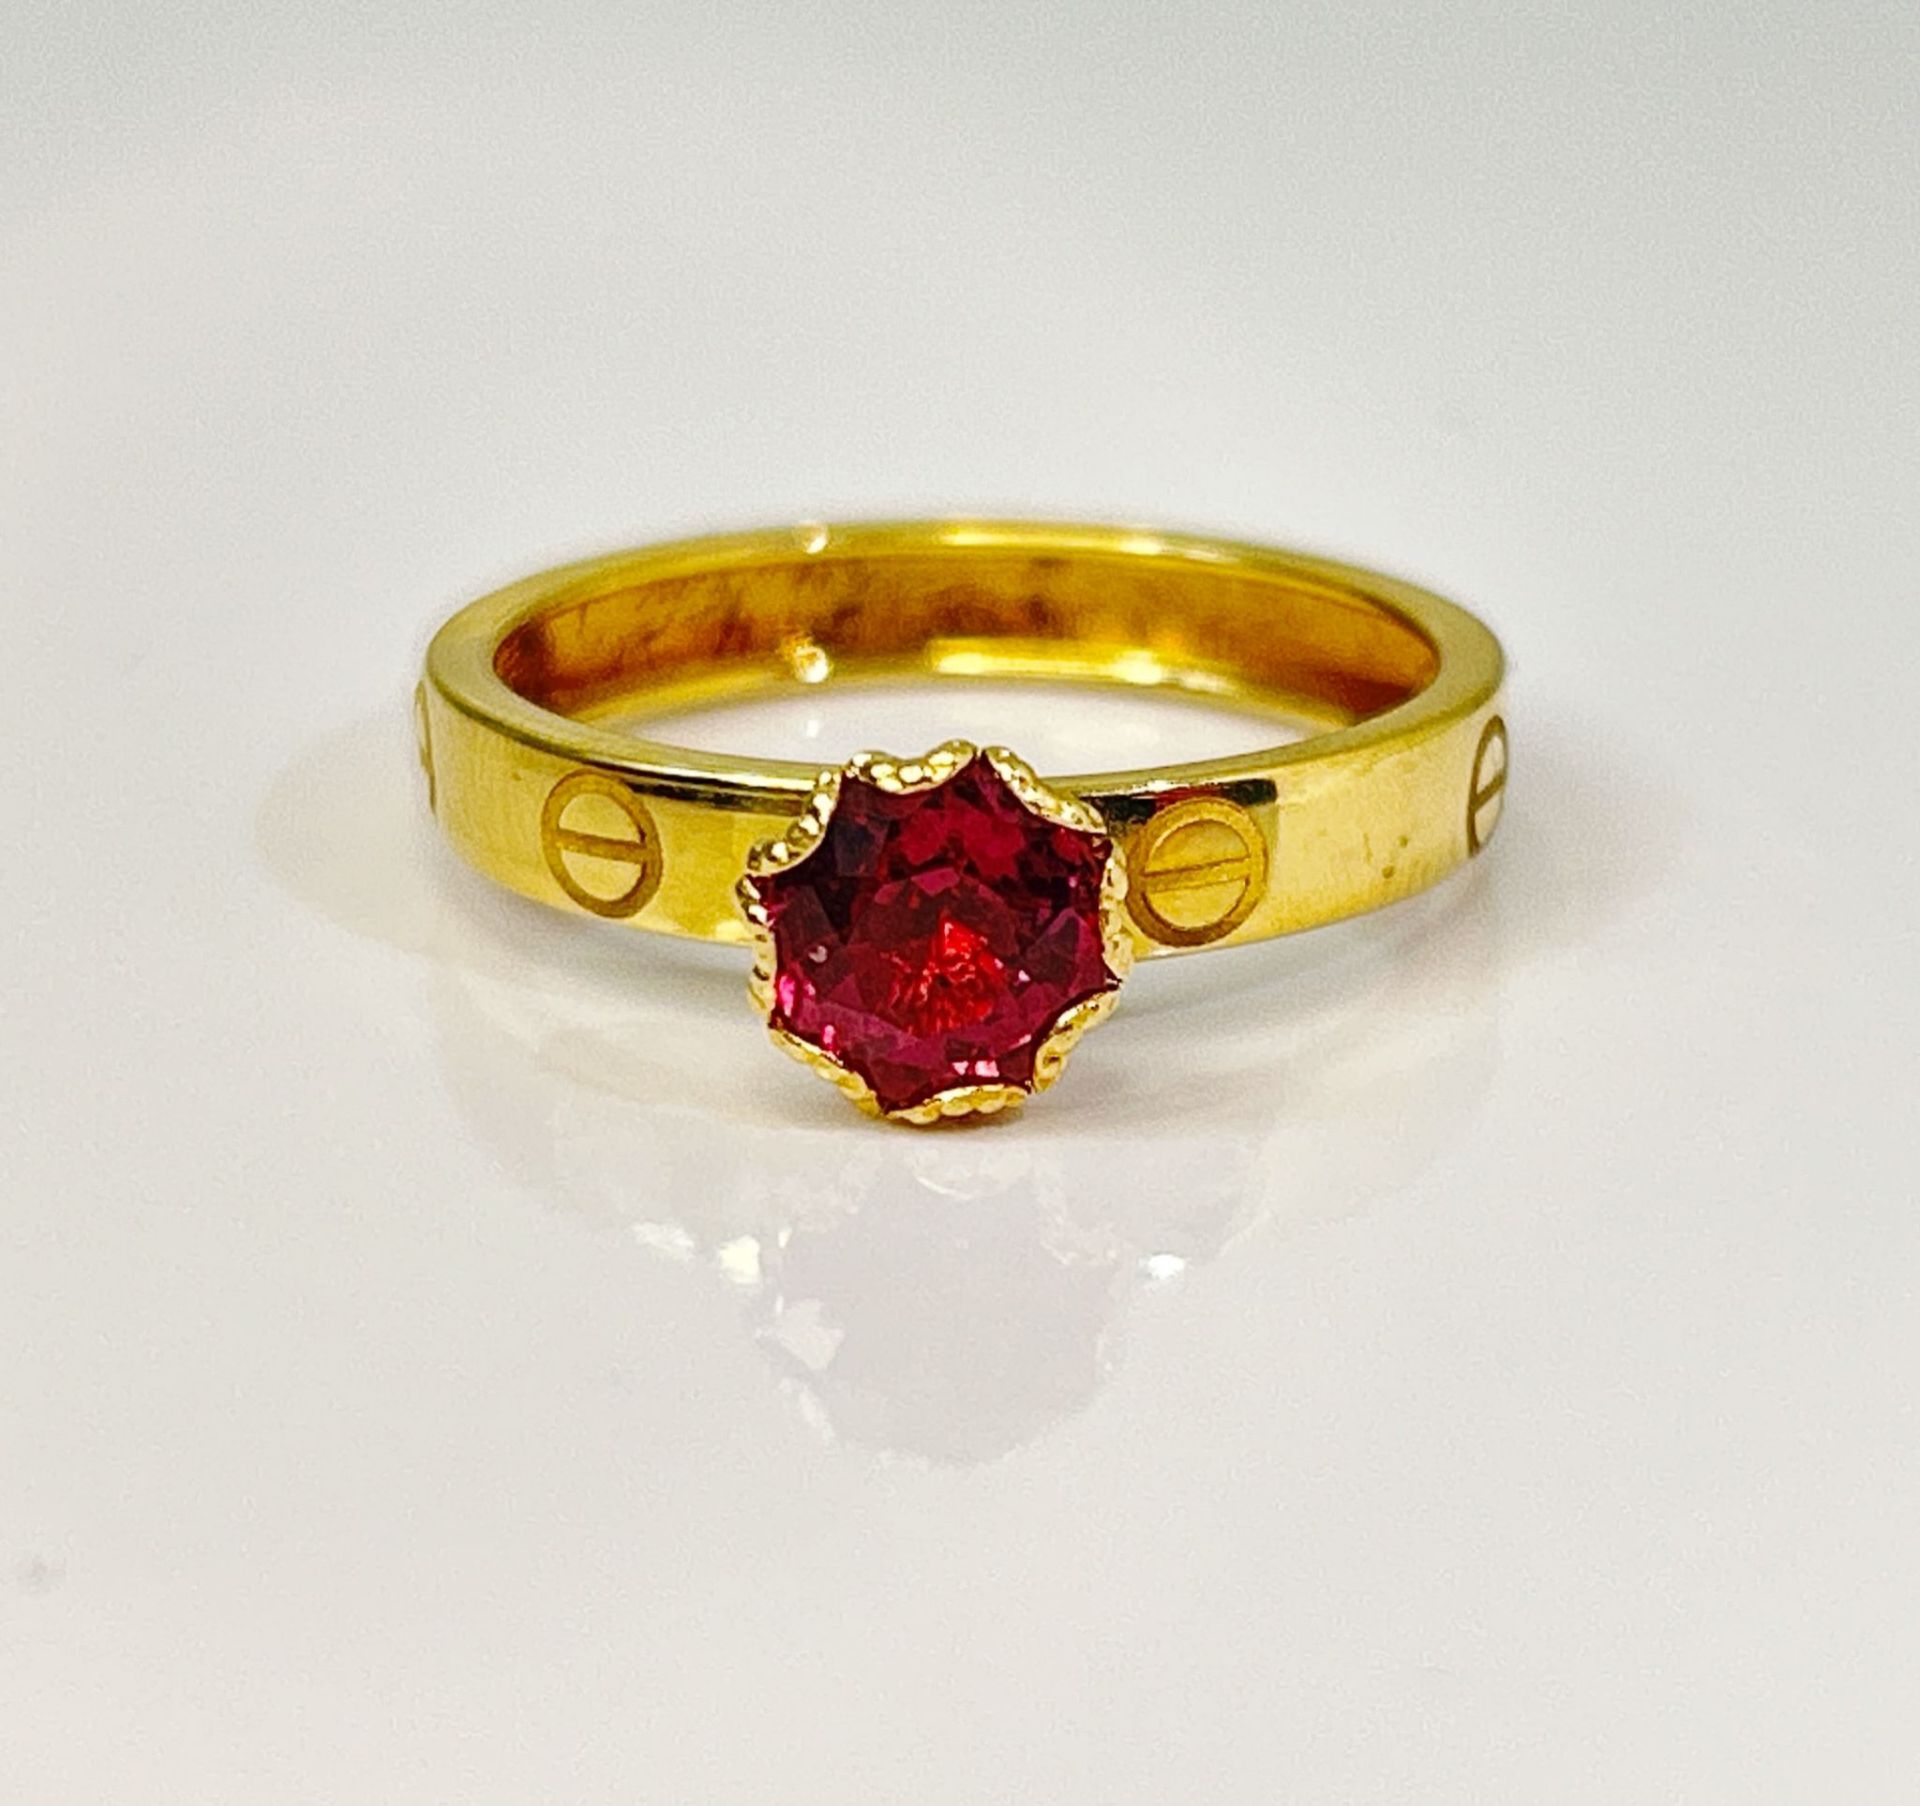 Beautiful Natural Spinel Ring & 18k Yellow Gold - Image 2 of 6